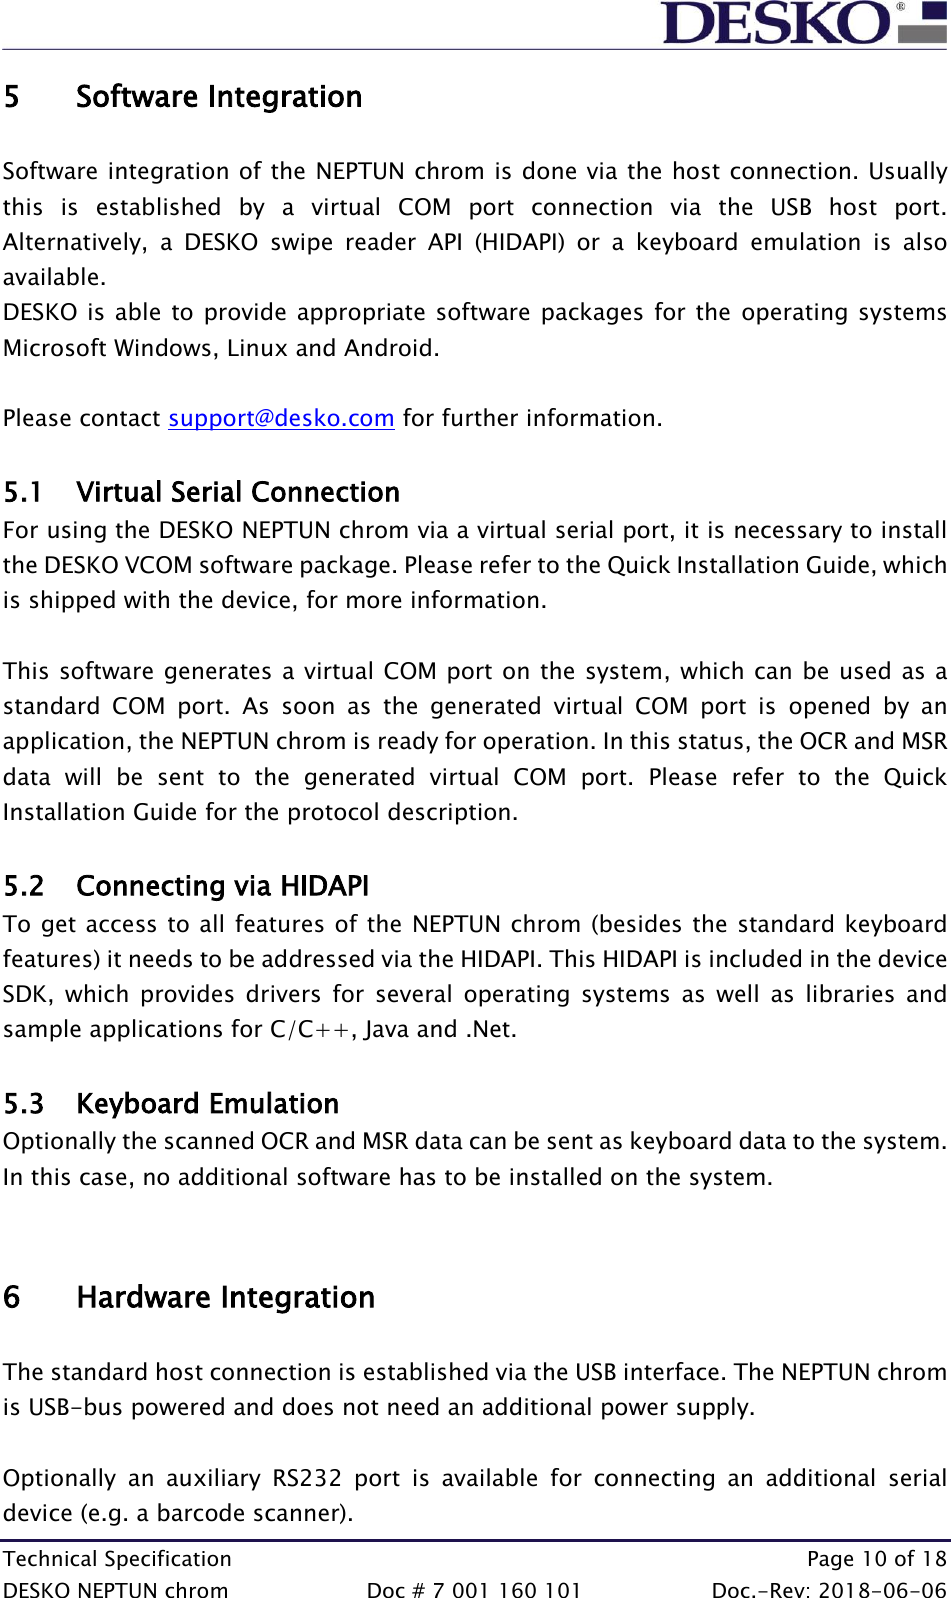  Technical Specification    Page 10 of 18 DESKO NEPTUN chrom  Doc # 7 001 160 101  Doc.-Rev: 2018-06-06 5 Software Integration  Software integration of the NEPTUN chrom is done via the host connection. Usually this  is  established  by  a  virtual  COM  port  connection  via  the  USB  host  port. Alternatively,  a  DESKO  swipe  reader  API  (HIDAPI)  or  a  keyboard  emulation  is  also available.  DESKO is able to provide appropriate software packages for the  operating systems Microsoft Windows, Linux and Android.  Please contact support@desko.com for further information.  5.1 Virtual Serial Connection For using the DESKO NEPTUN chrom via a virtual serial port, it is necessary to install the DESKO VCOM software package. Please refer to the Quick Installation Guide, which is shipped with the device, for more information.  This software generates a virtual COM port on the system, which can be used as a standard  COM  port.  As  soon  as  the  generated  virtual  COM  port  is  opened  by  an application, the NEPTUN chrom is ready for operation. In this status, the OCR and MSR data  will  be  sent  to  the  generated  virtual  COM  port.  Please  refer  to  the  Quick Installation Guide for the protocol description.  5.2 Connecting via HIDAPI To get access to all features of the NEPTUN chrom (besides the standard keyboard features) it needs to be addressed via the HIDAPI. This HIDAPI is included in the device SDK,  which  provides  drivers  for  several  operating  systems  as  well  as  libraries  and sample applications for C/C++, Java and .Net.  5.3 Keyboard Emulation Optionally the scanned OCR and MSR data can be sent as keyboard data to the system. In this case, no additional software has to be installed on the system.   6 Hardware Integration  The standard host connection is established via the USB interface. The NEPTUN chrom is USB-bus powered and does not need an additional power supply.   Optionally  an  auxiliary  RS232  port  is  available  for  connecting  an  additional  serial device (e.g. a barcode scanner).  